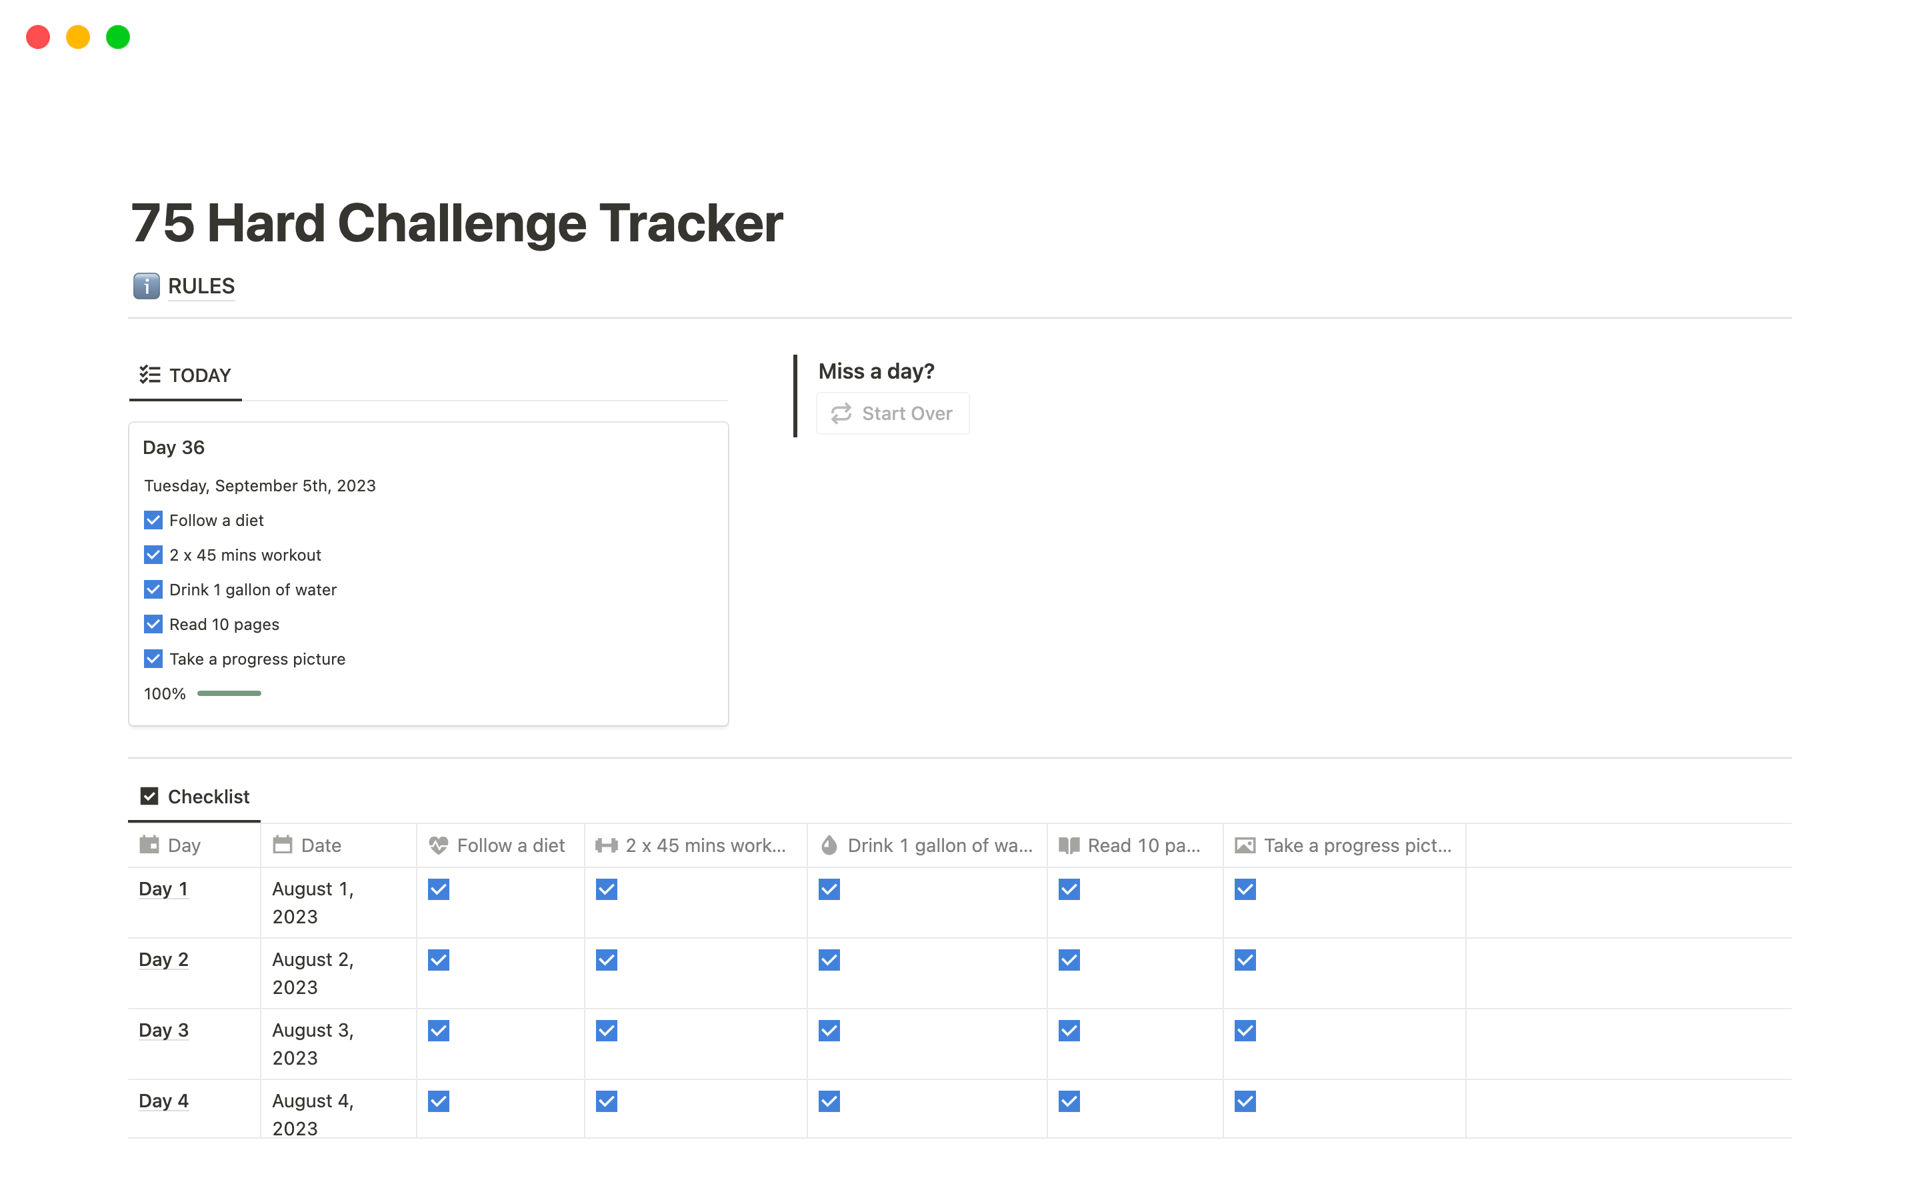 This Notion template will help you track your progress throughout the 75 Hard Challenge.